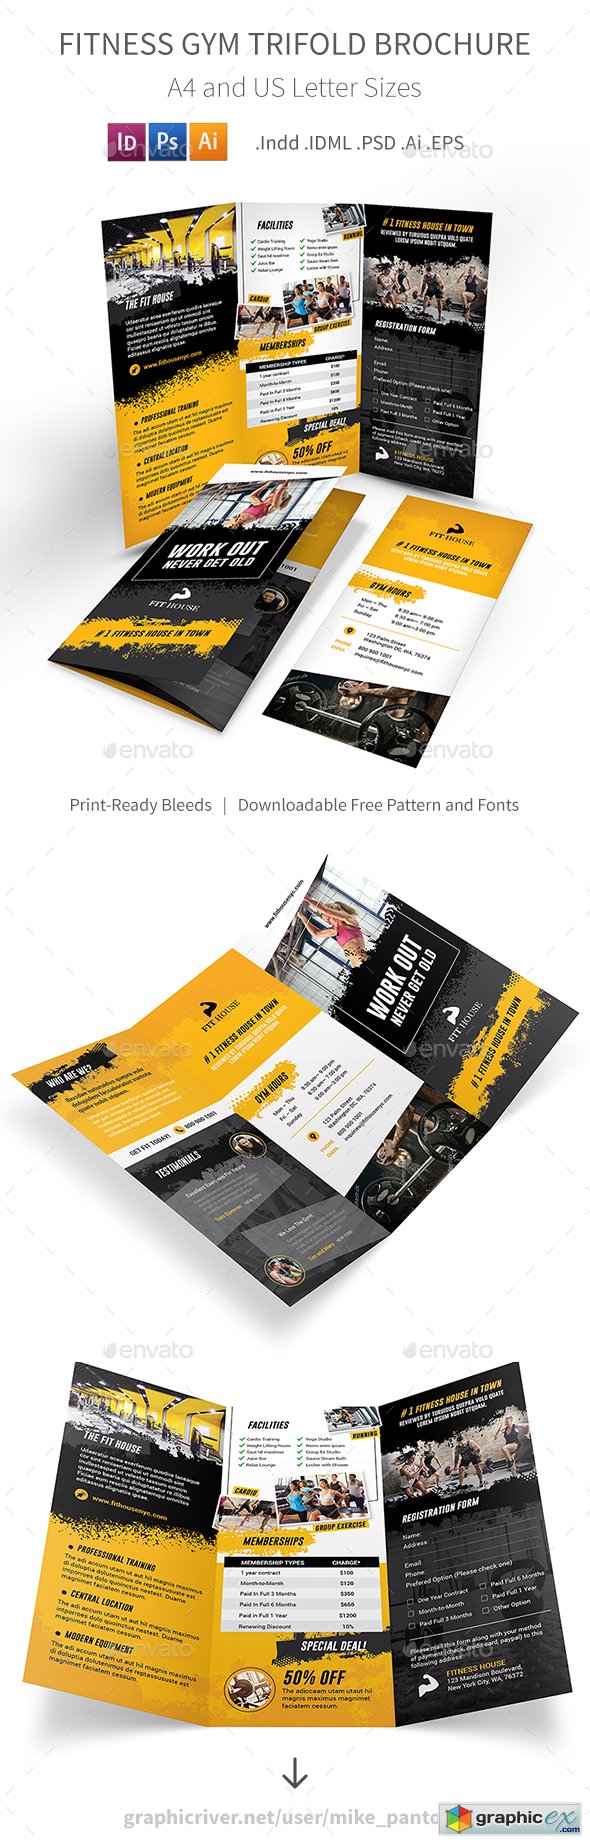 Fitness Gym Trifold Brochure 5